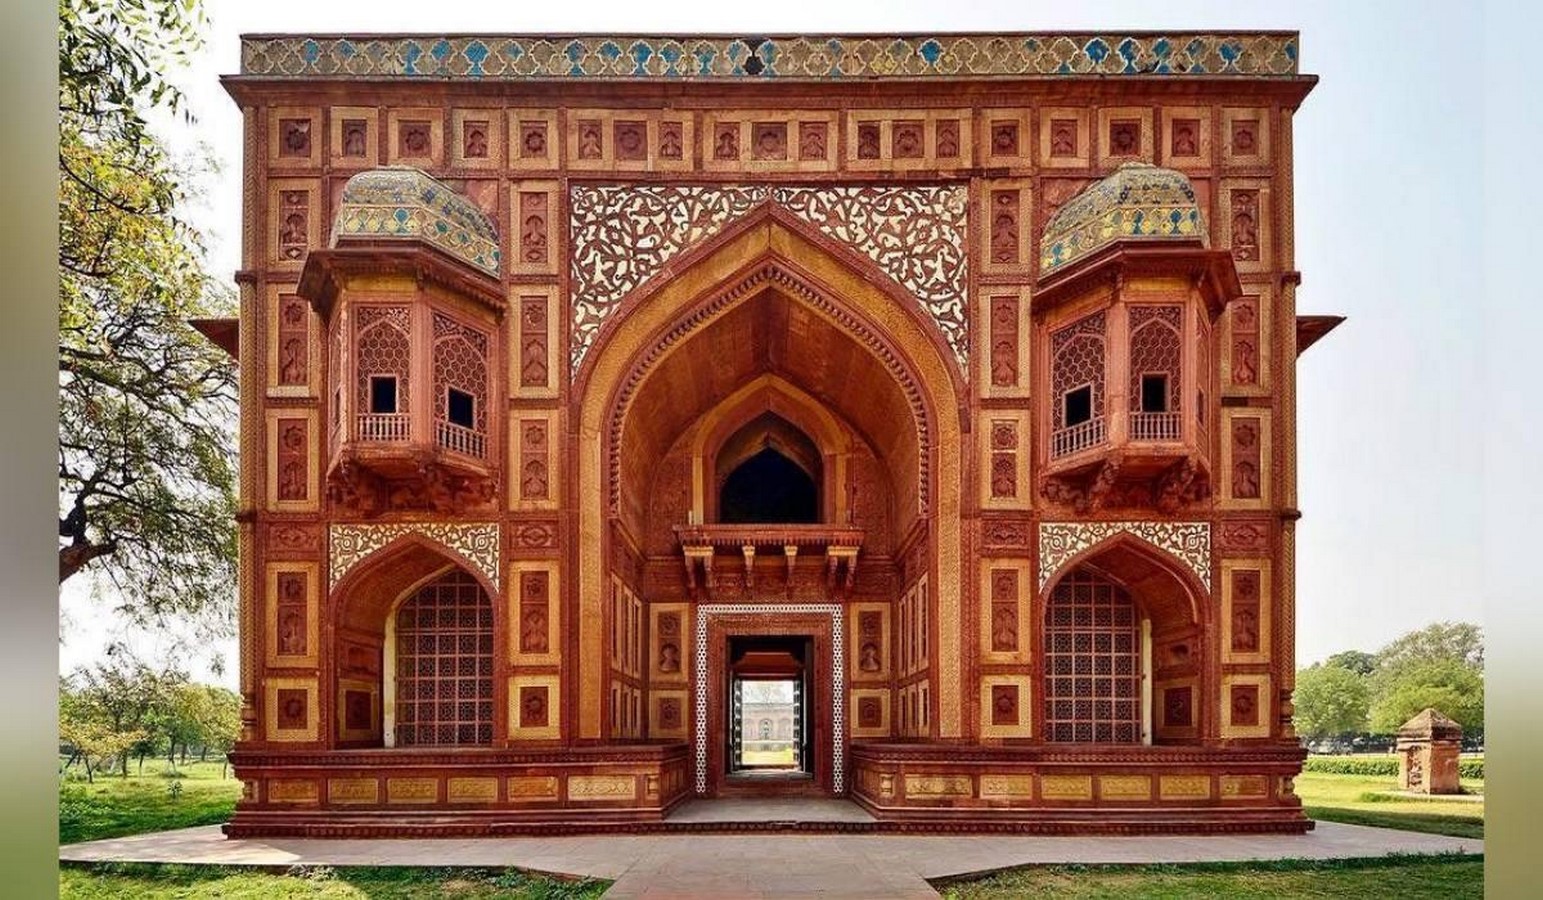 Front View of The Kanch Mahal_ ©www.housing.com